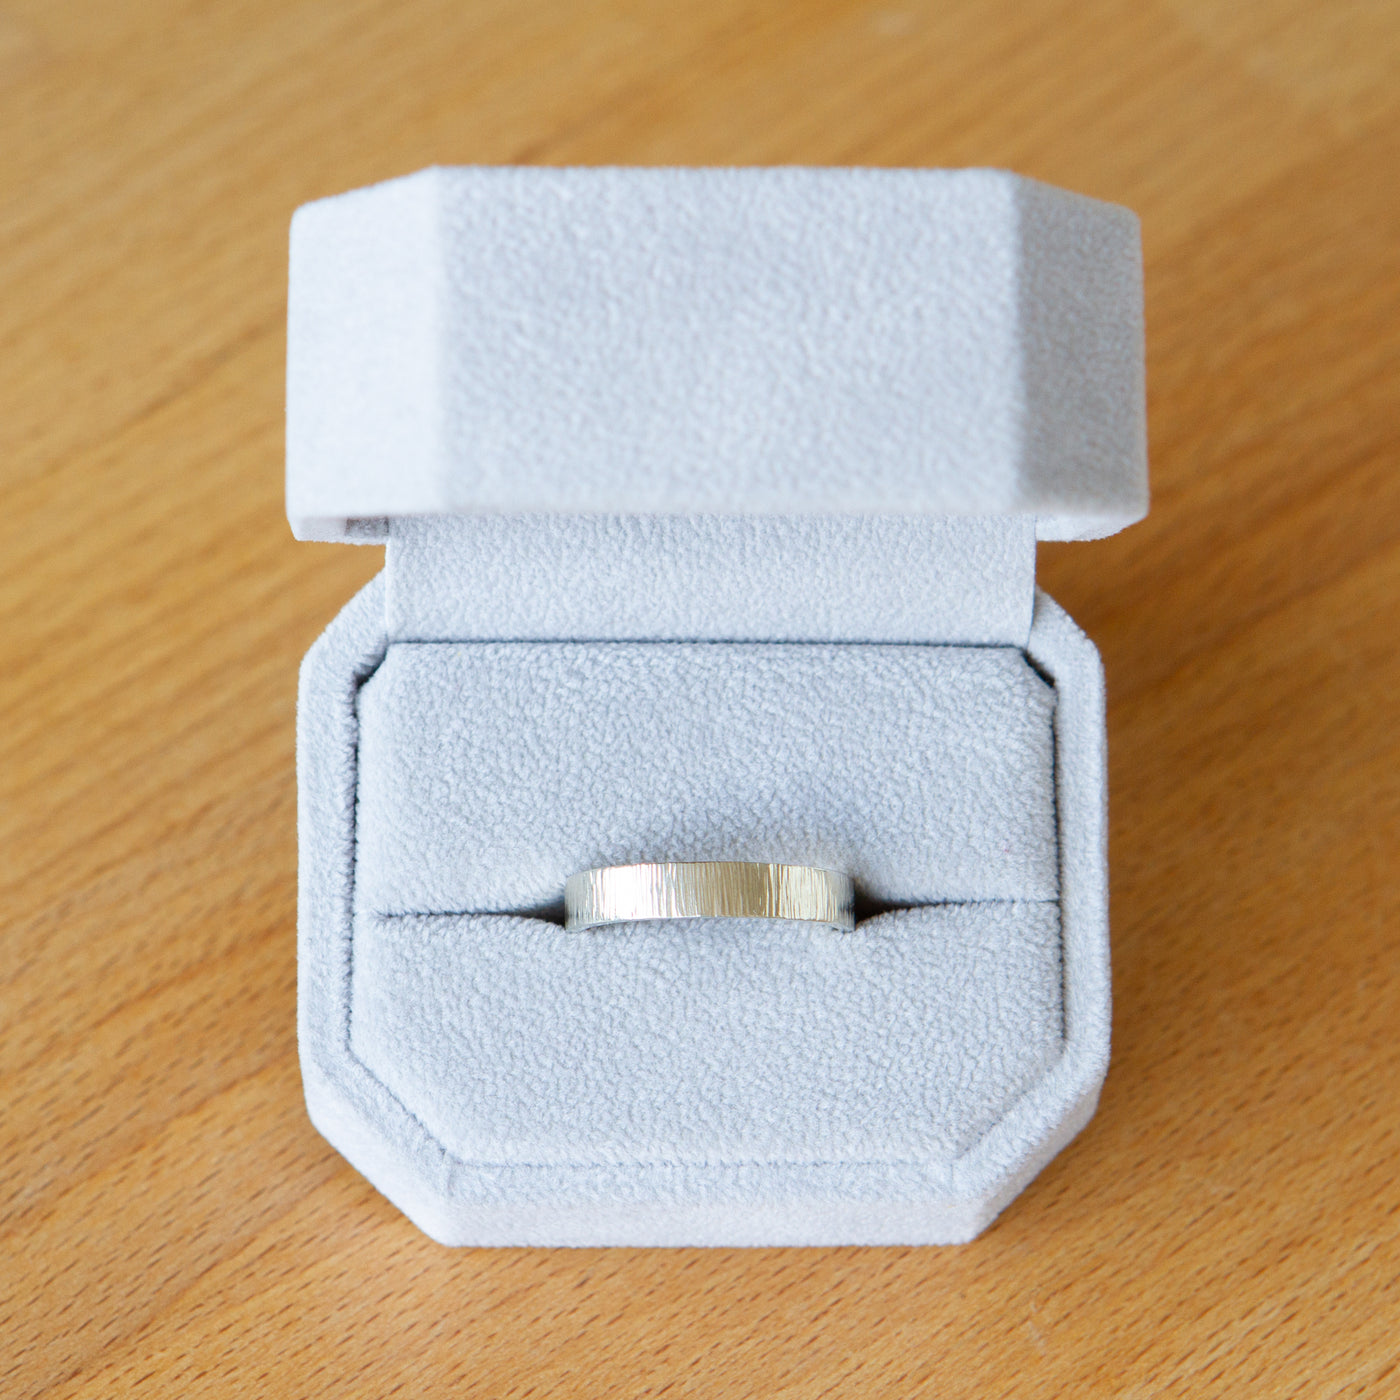 14k white gold Zion Band in a ring box by Corey Egan